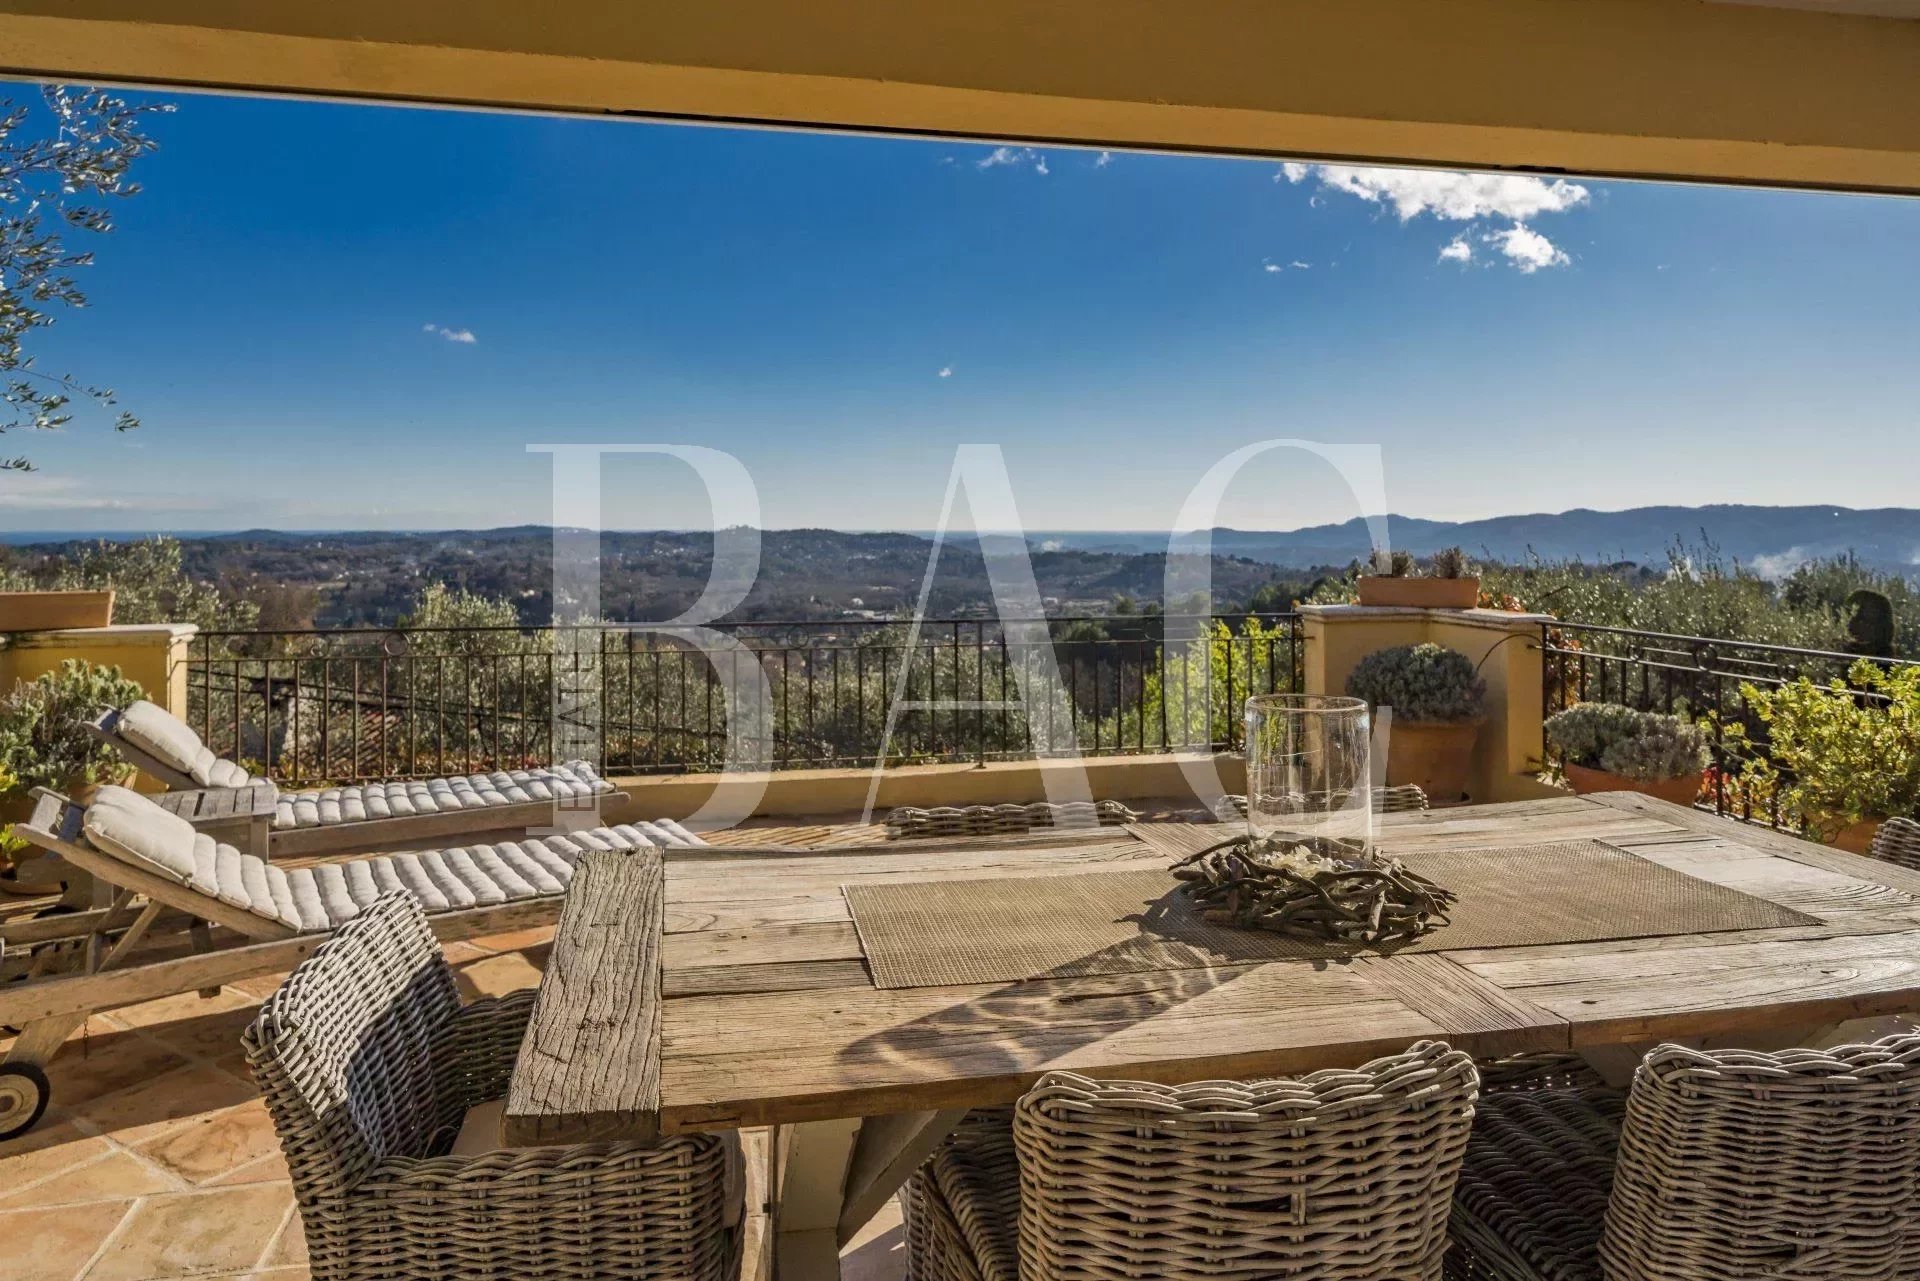 Châteauneuf-Grasse, magnificent Provençal villa with panoramic views.